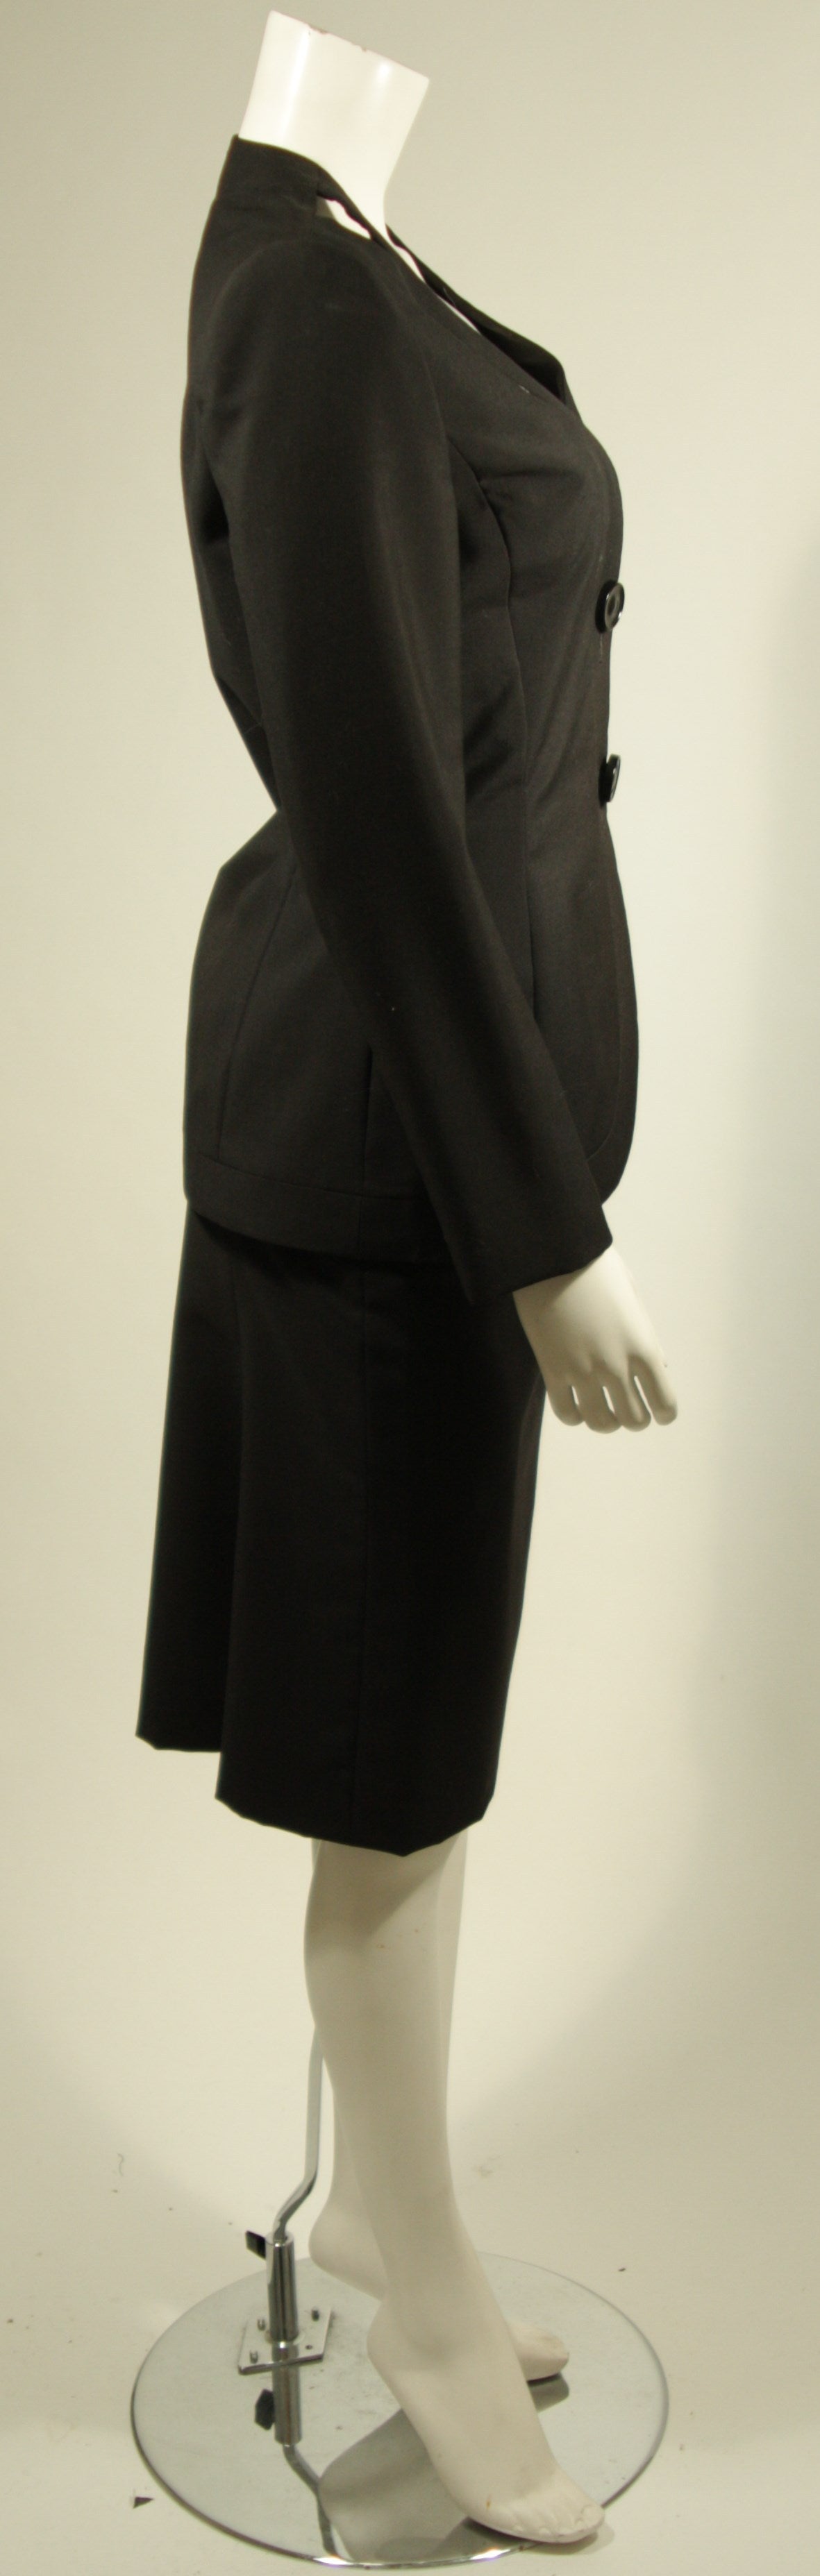 GALANOS HAUTE COUTURE Betsy Bloomingdale Black Skirt Suit with Cut-Out Details 1